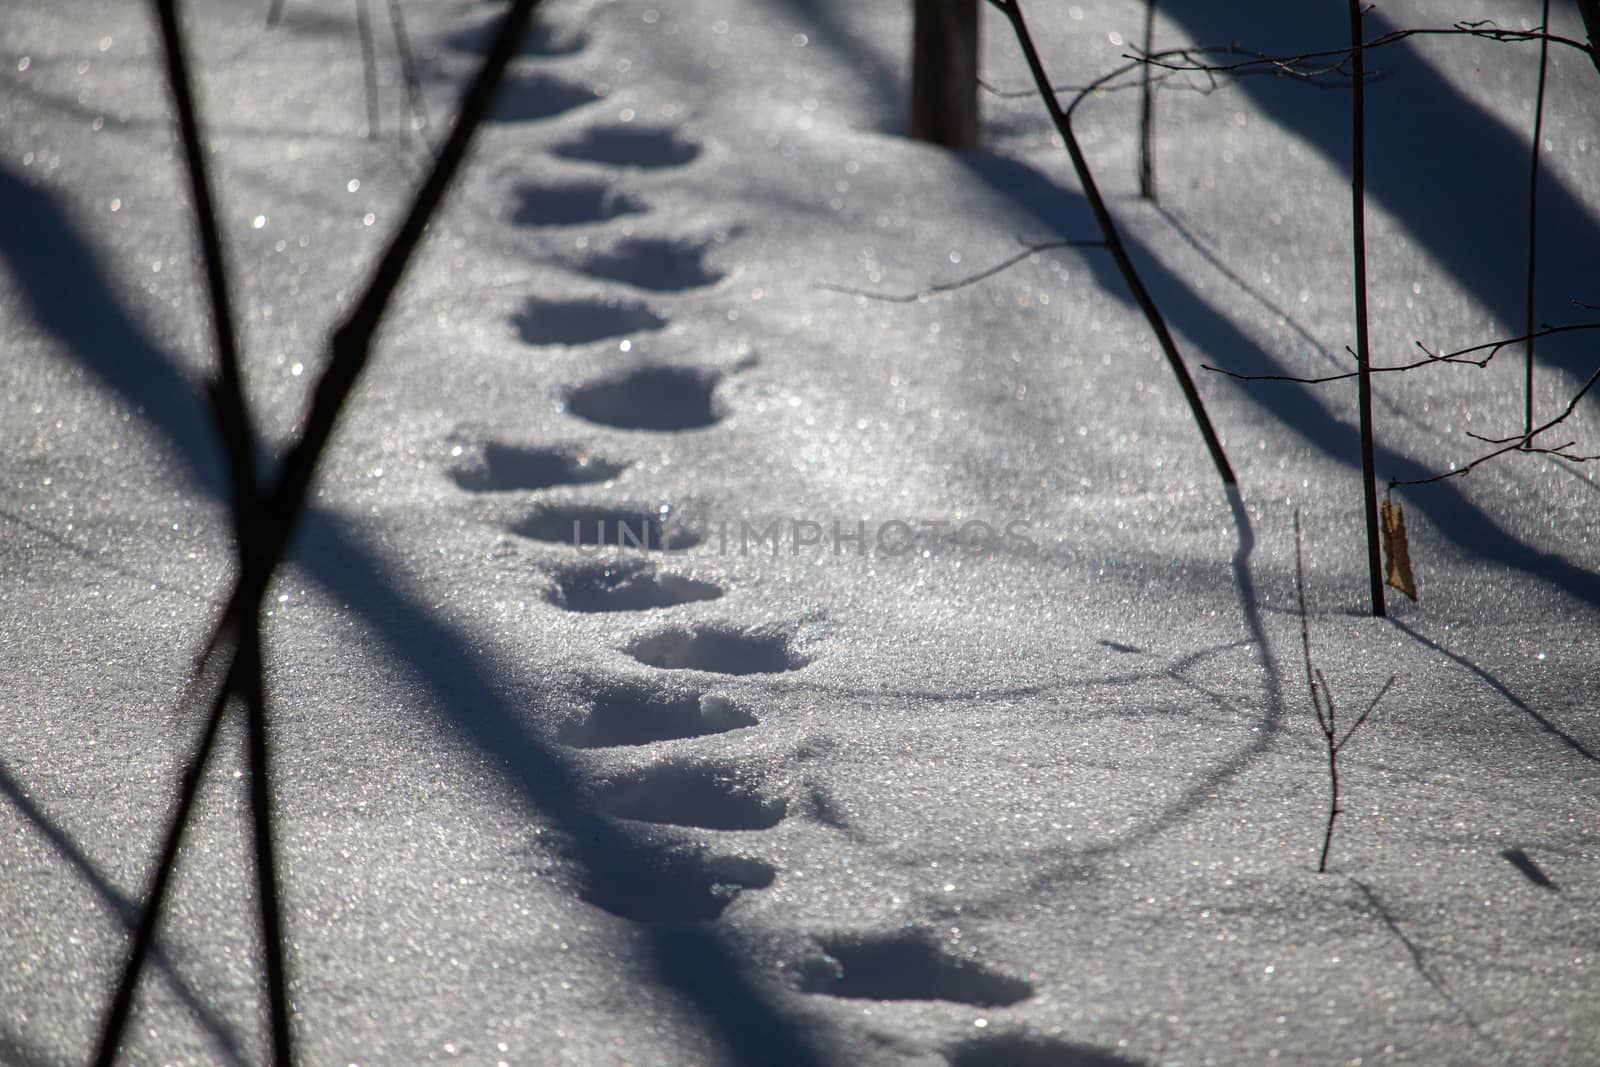 In a forest, a line of animal tracks are seen in deep snow. The surface of the snow is reflecting sunlight and shows shadows of the surrounding forest, through which the footprints lead.